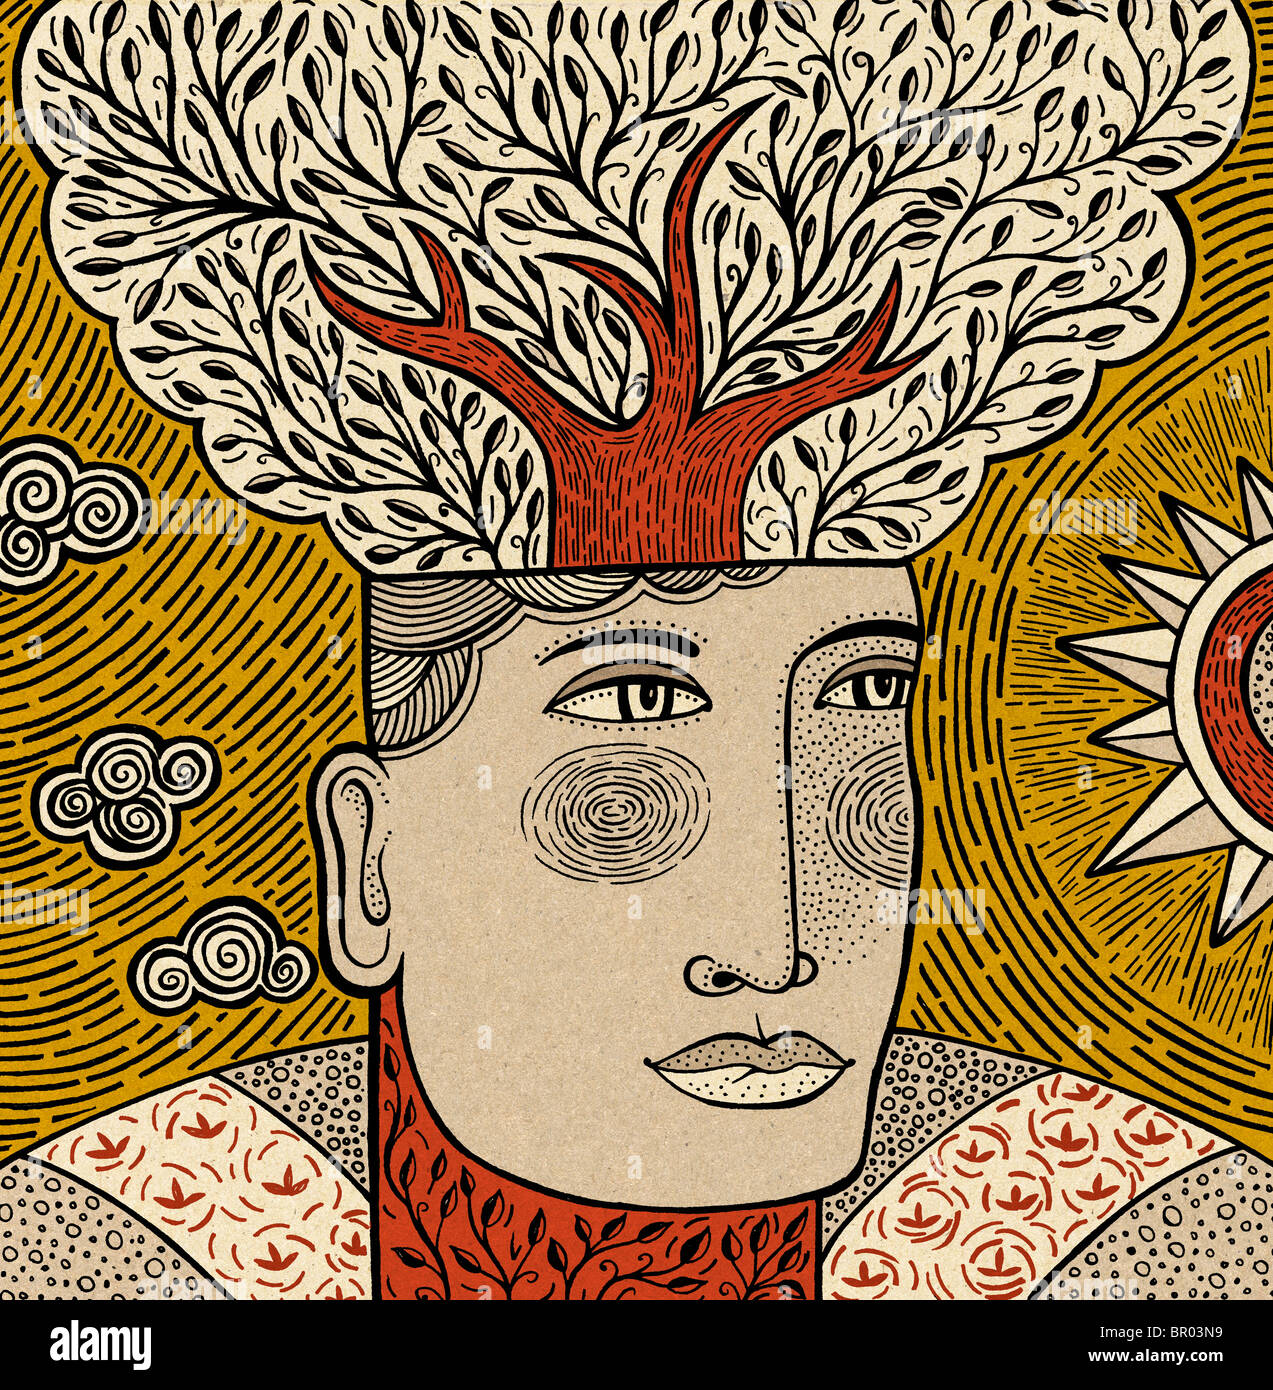 Illustration of a man with a tree growing out of his head Stock Photo